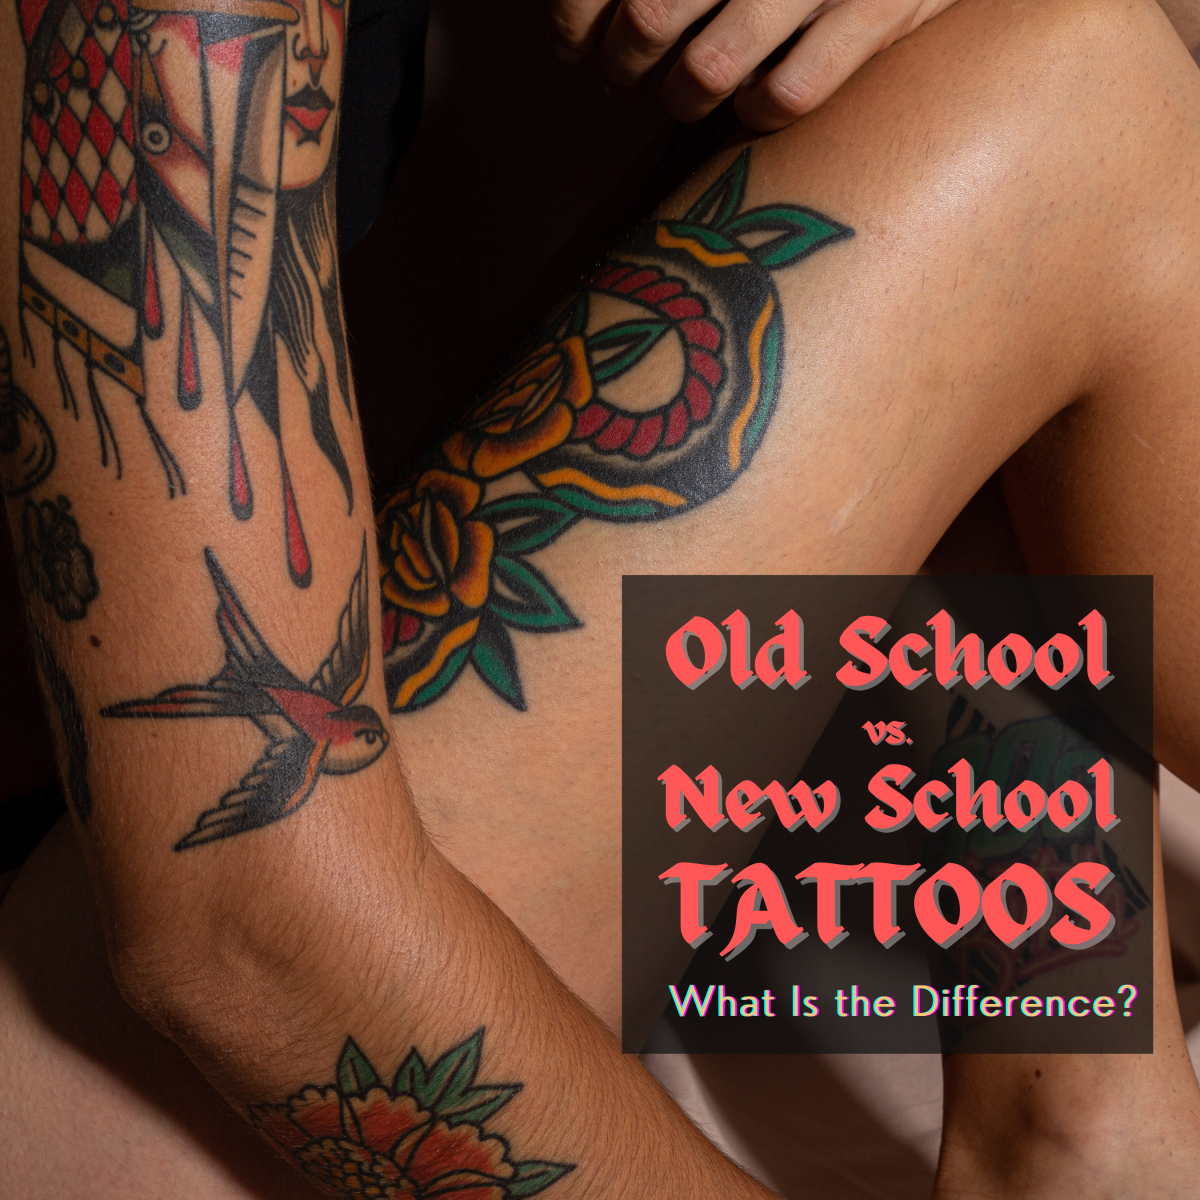 Old School vs. New School Tattoos: How to Tell the Difference